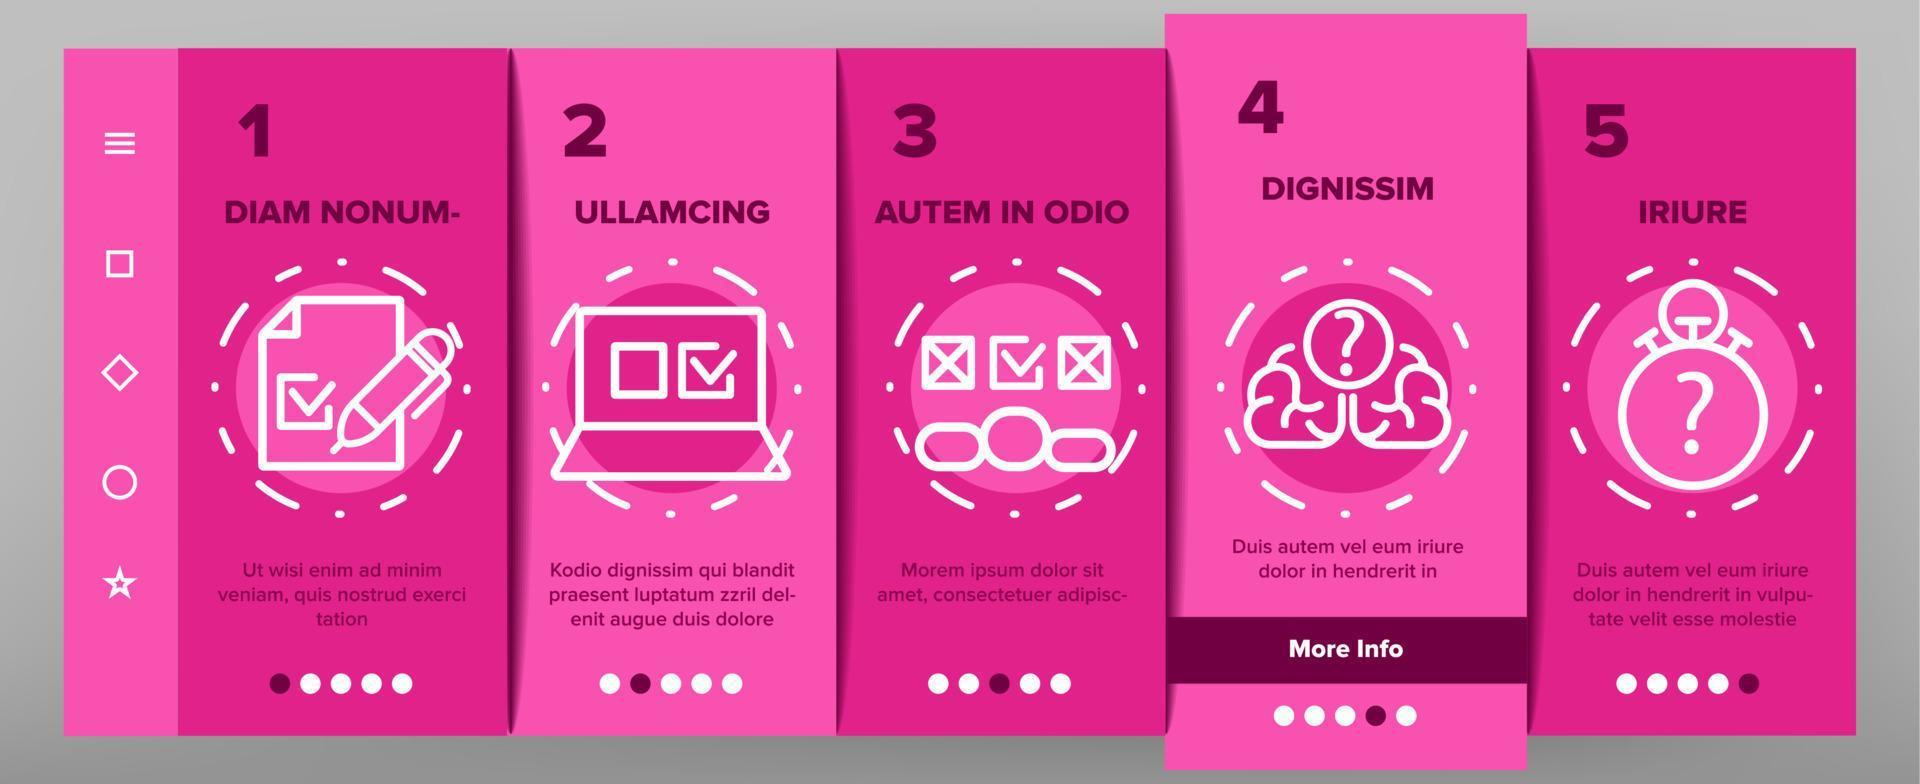 Quiz Game Onboarding Icons Set Vector